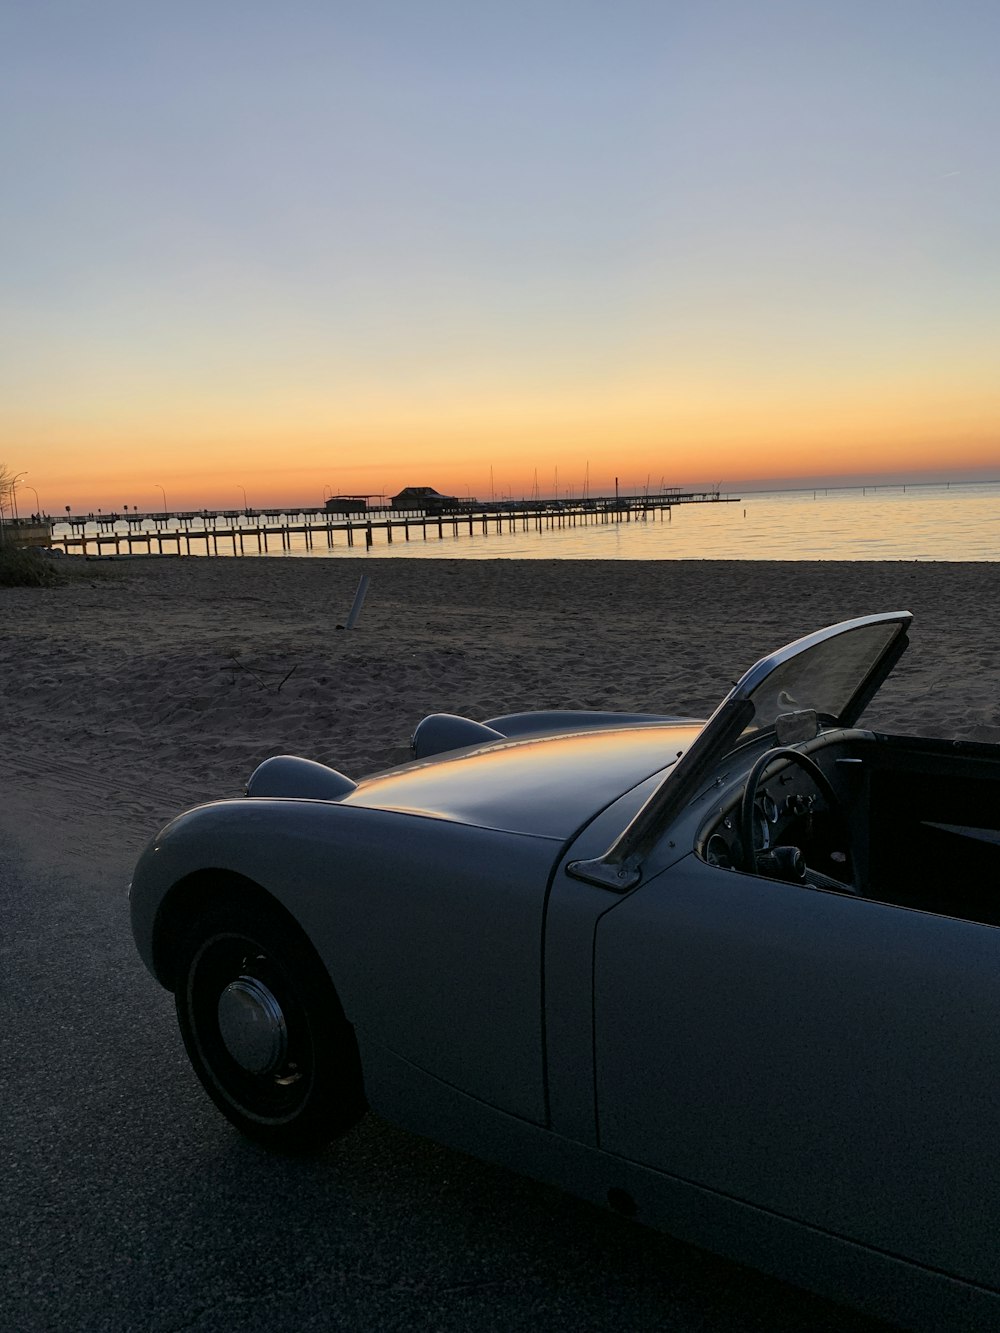 black convertible car on gray sand during sunset